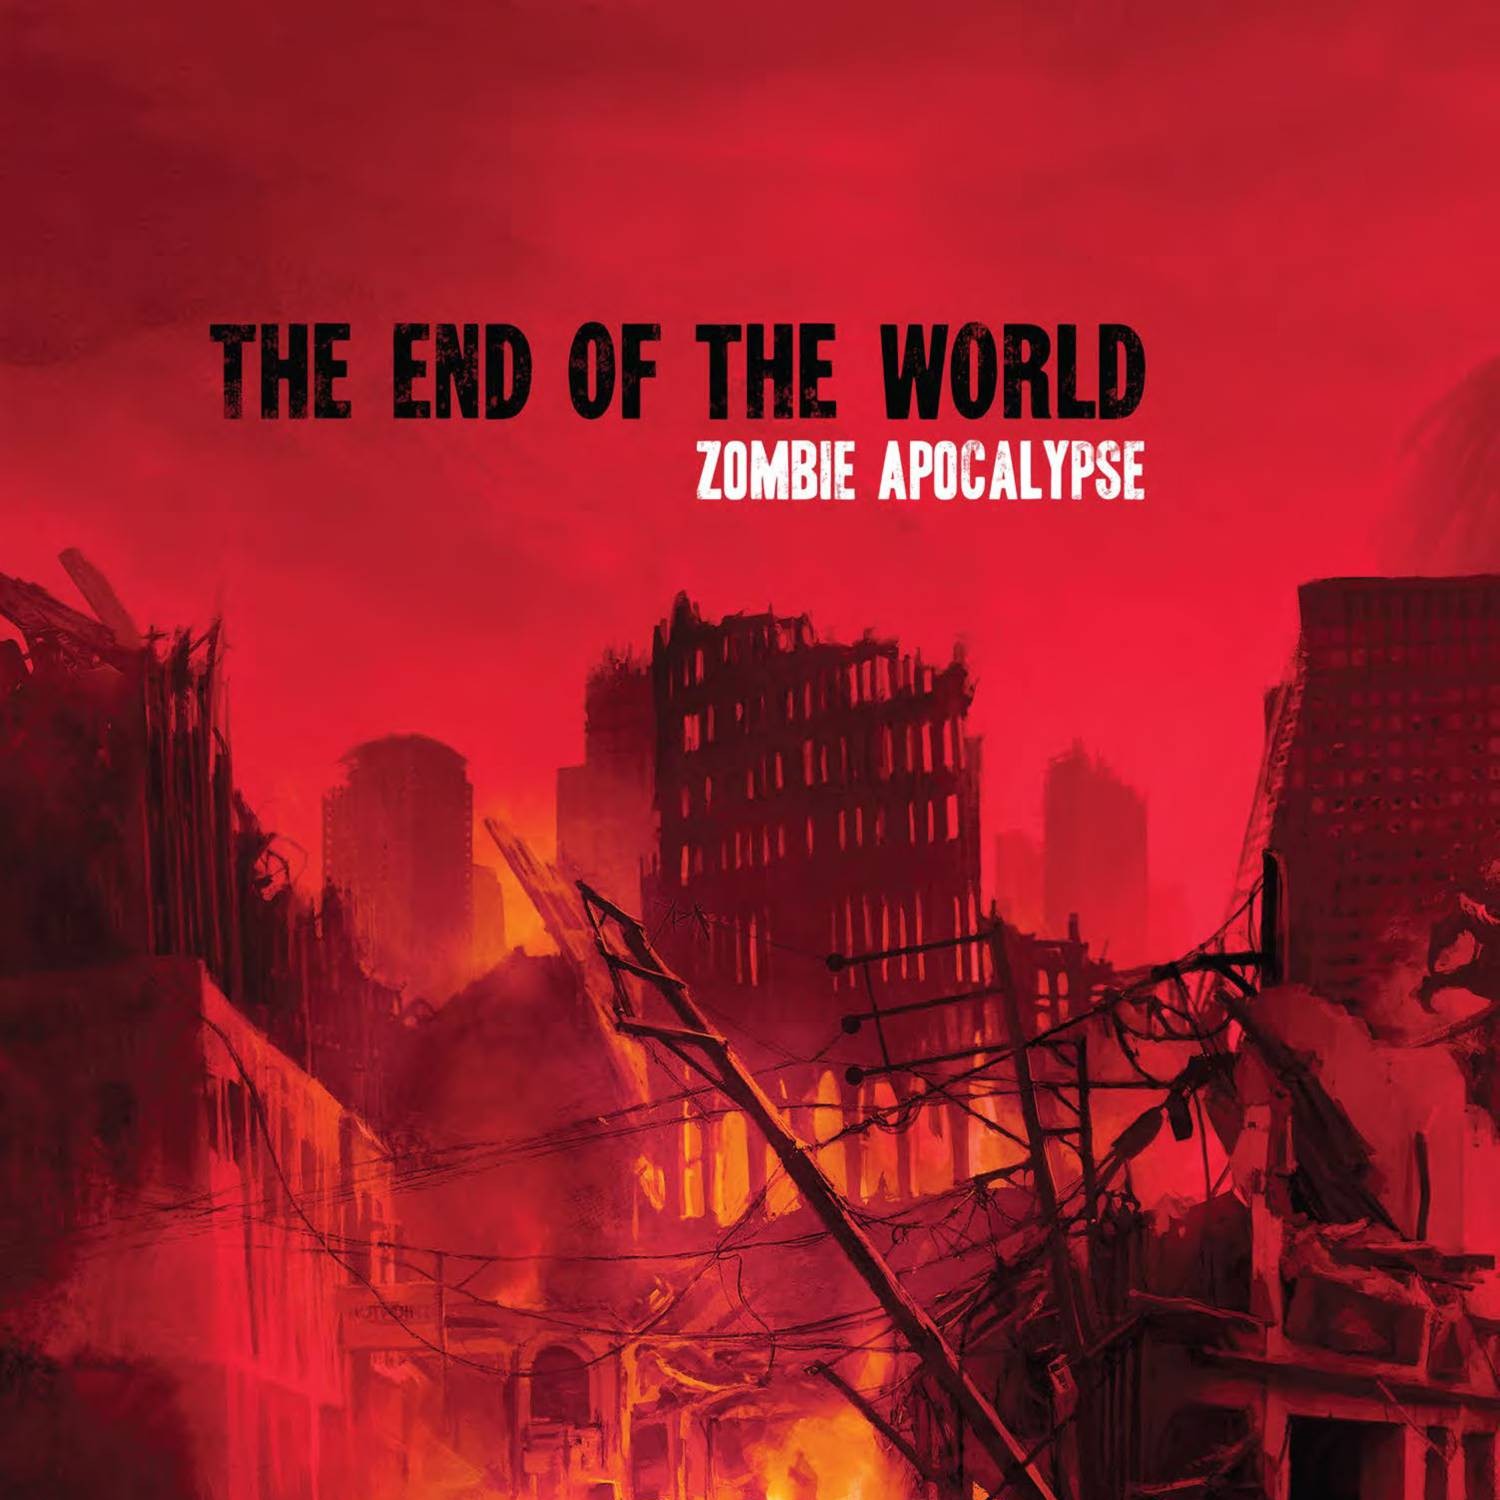 the end of the sun zombie film